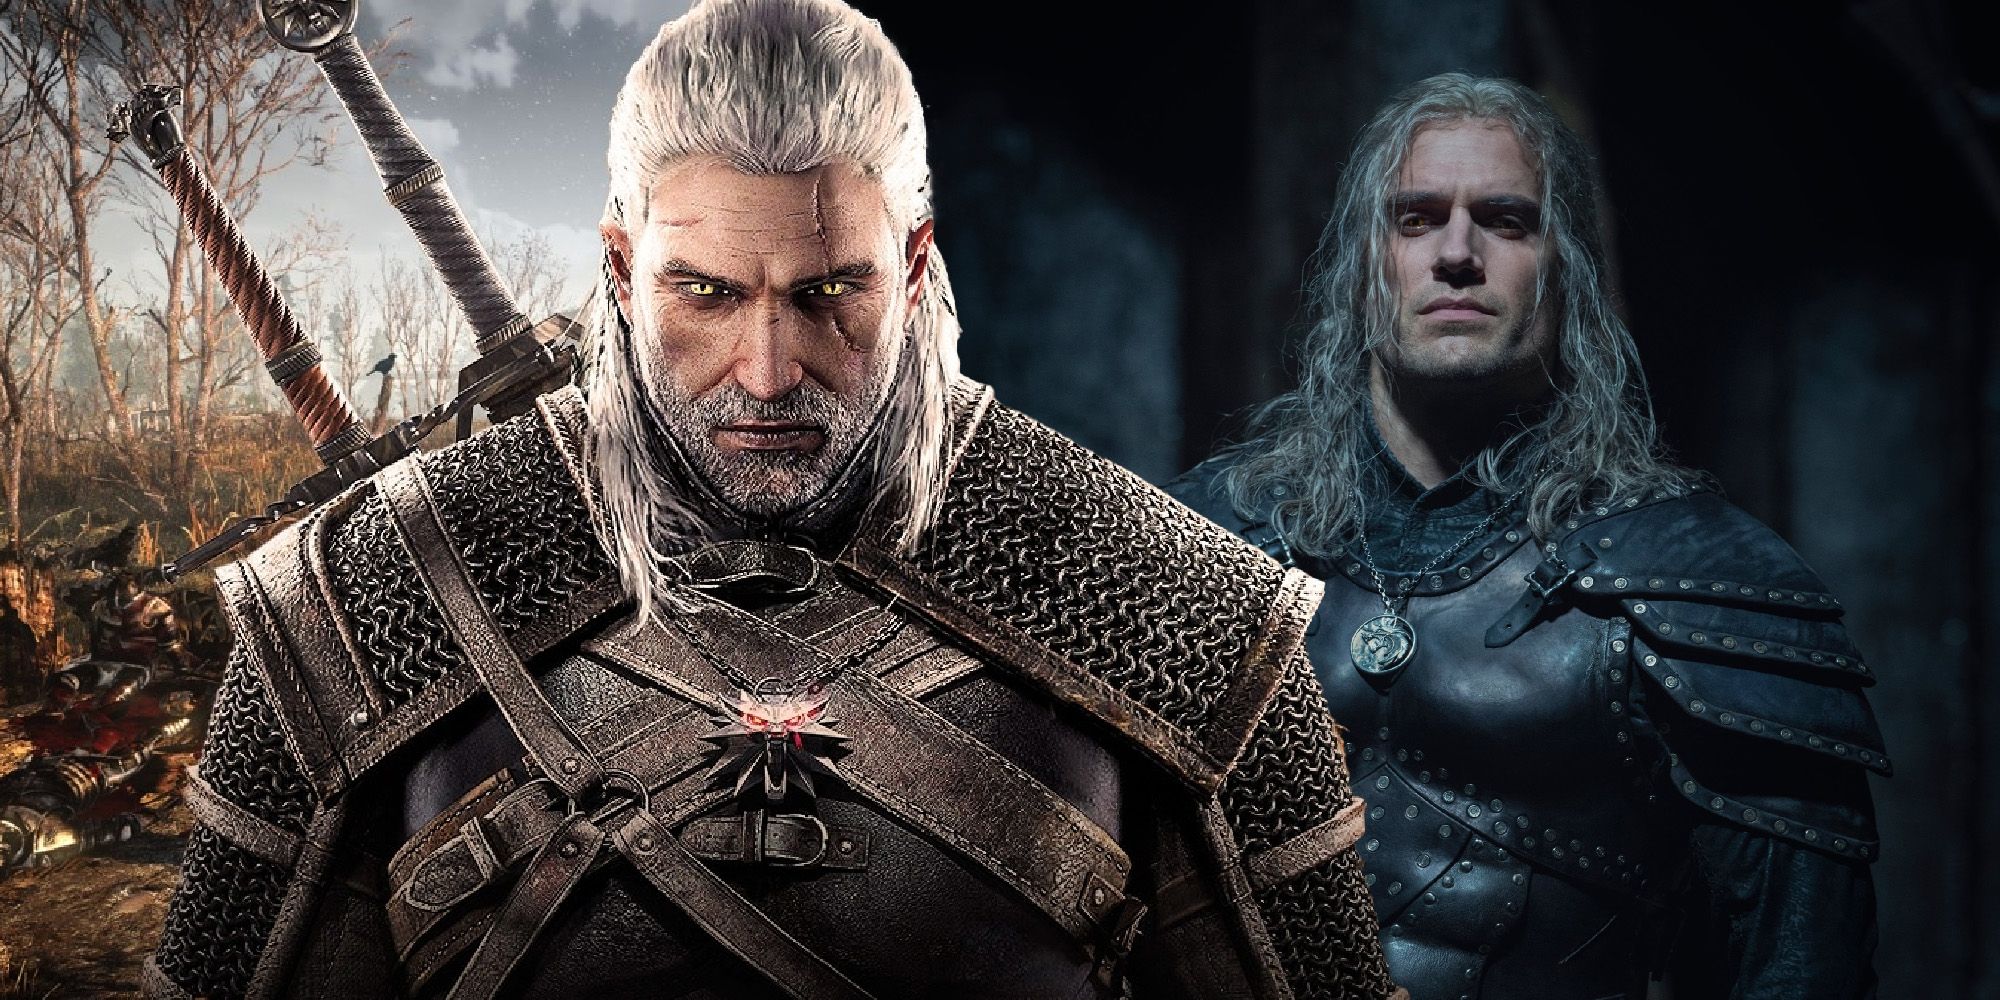 Henry Cavill Geralt the witcher game